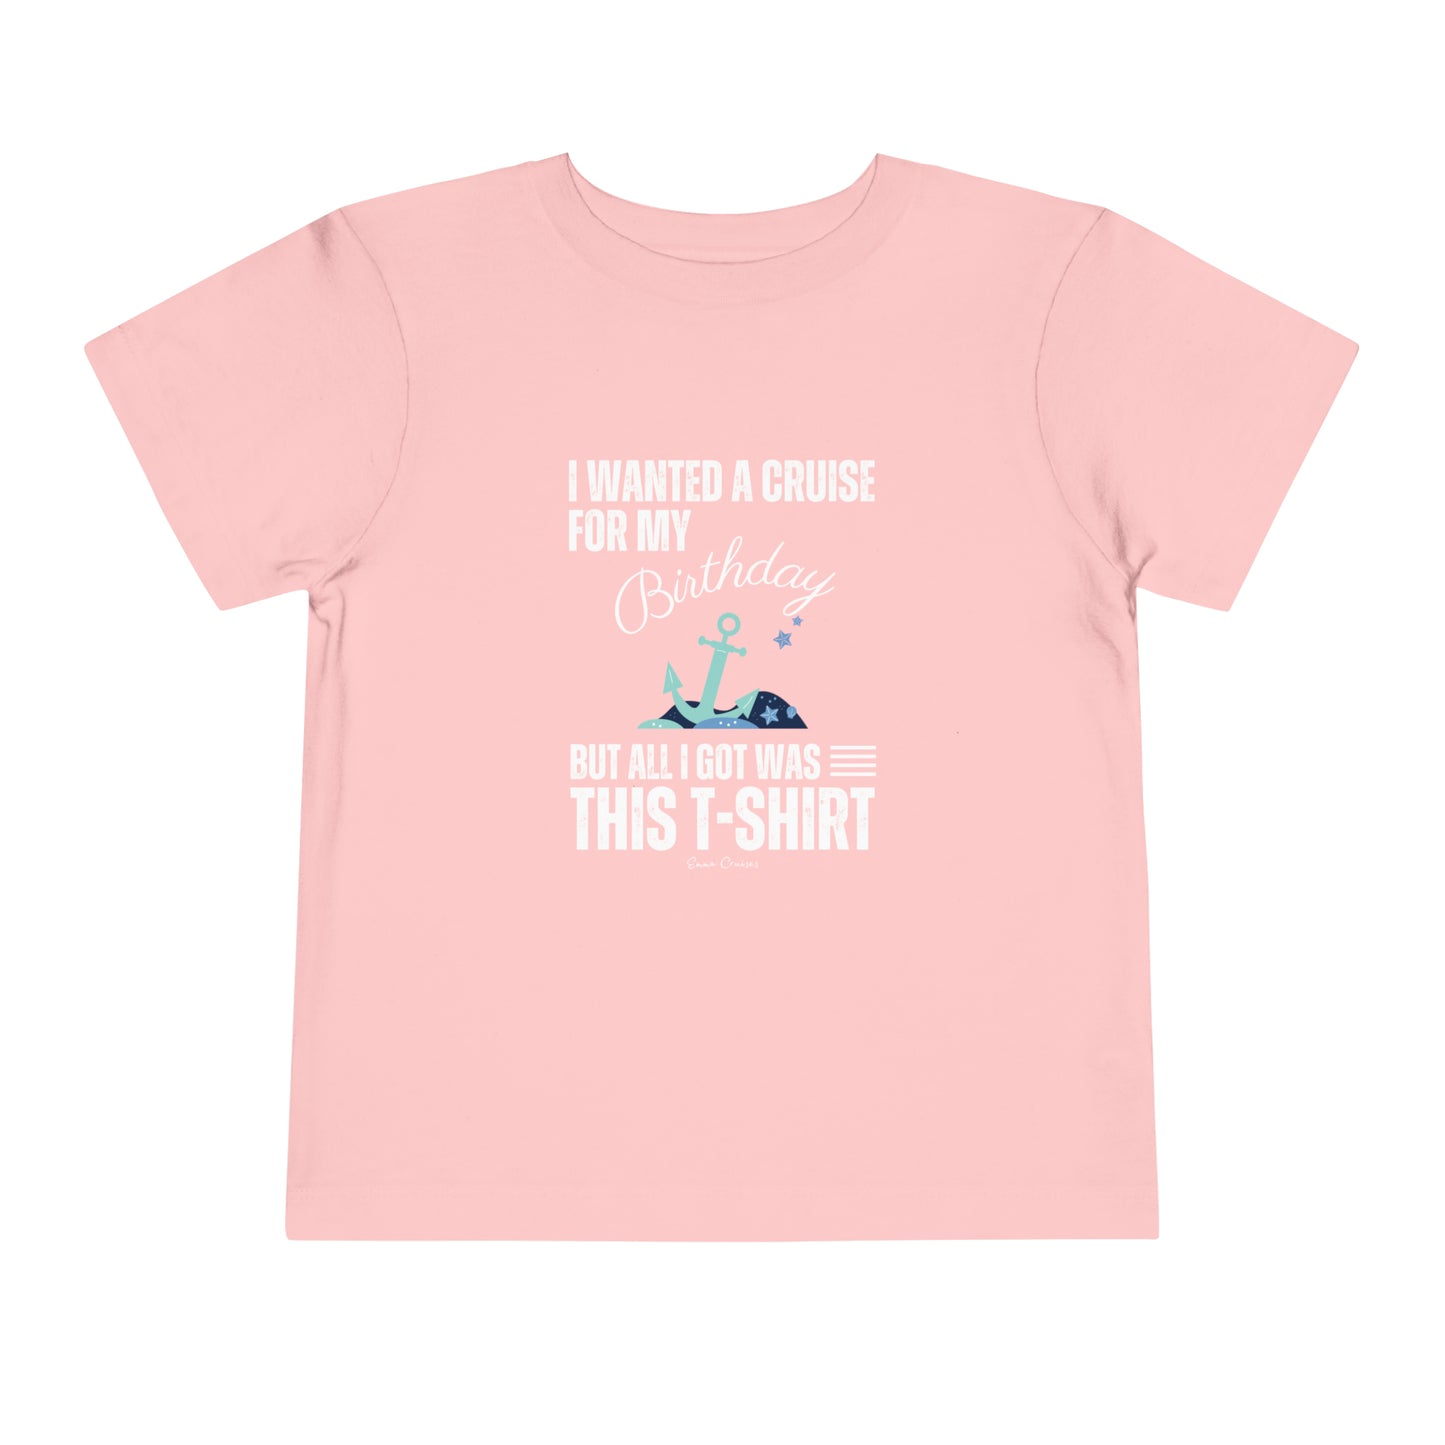 I Wanted a Cruise for my Birthday - Toddler UNISEX T-Shirt